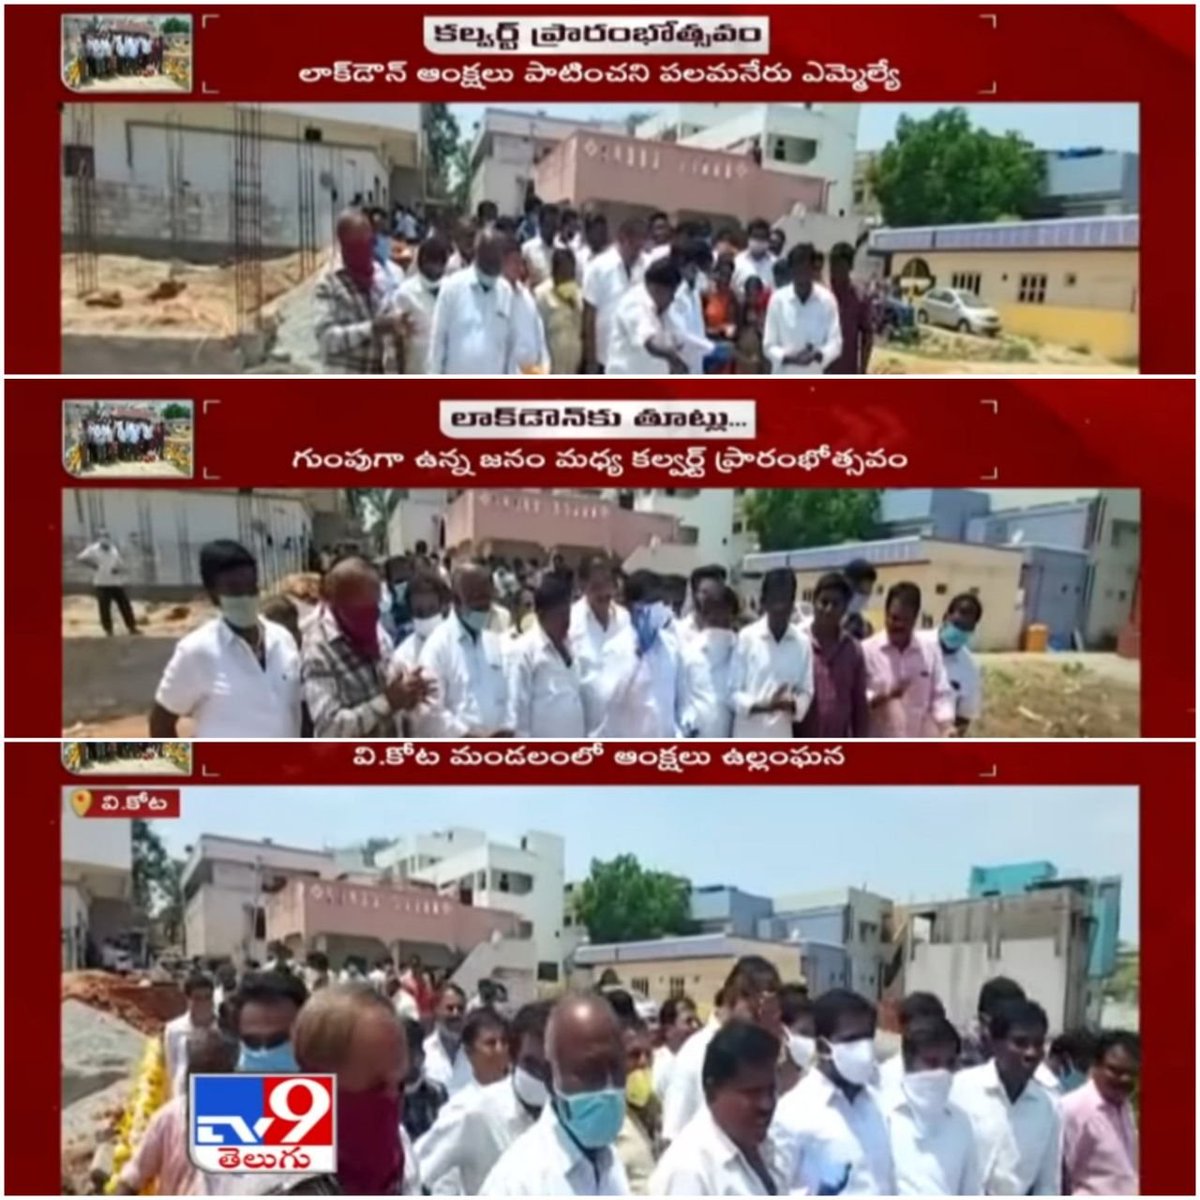 Culvert inauguration amidst lockdownThat Pose by another YSRCP MLA during the distribution - Sir Social Distancing??